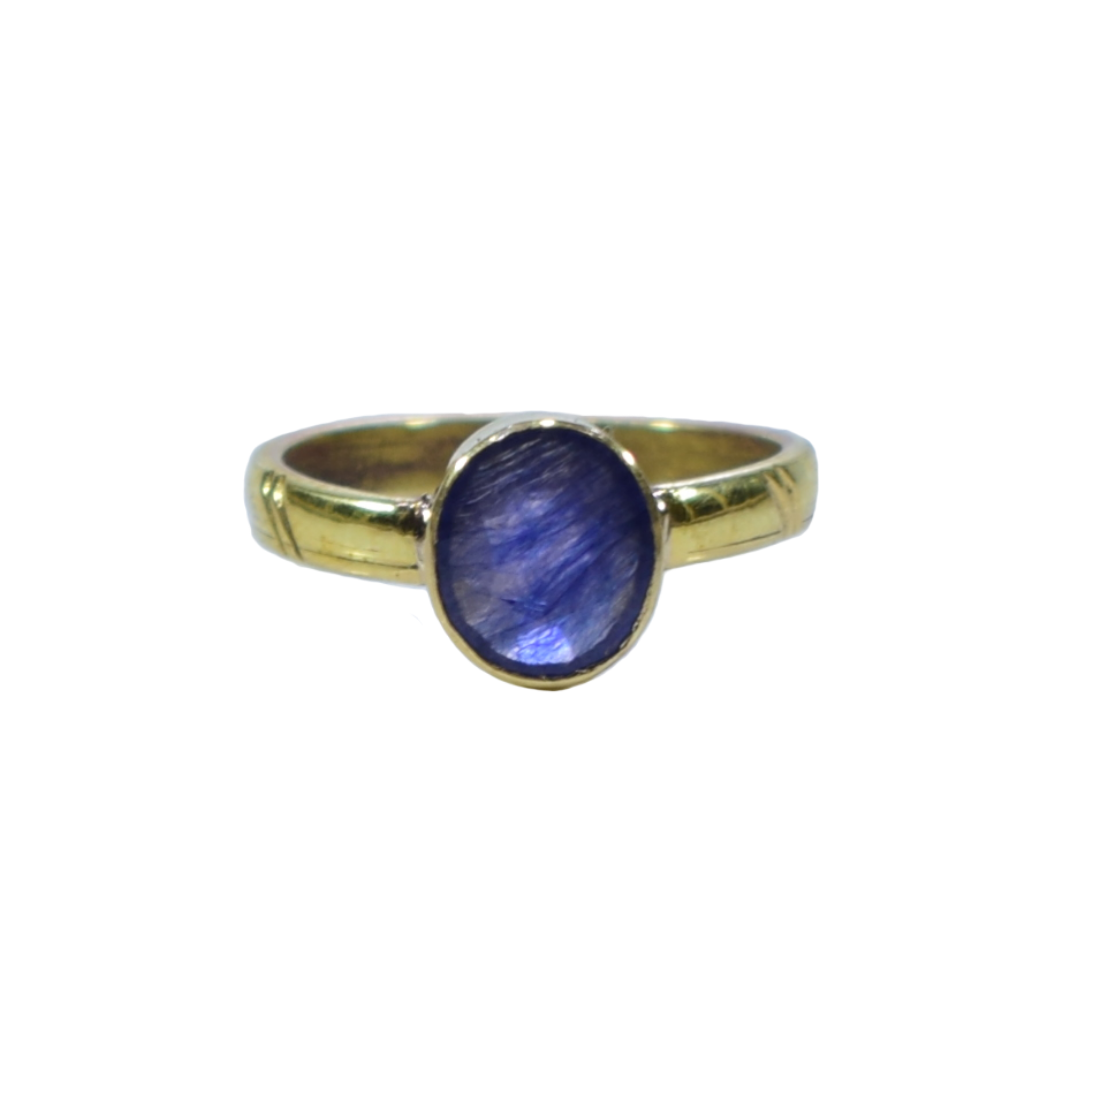 Buy Opal Birthstone Ring- Energized and Lab tested Ring for Benefic Venus